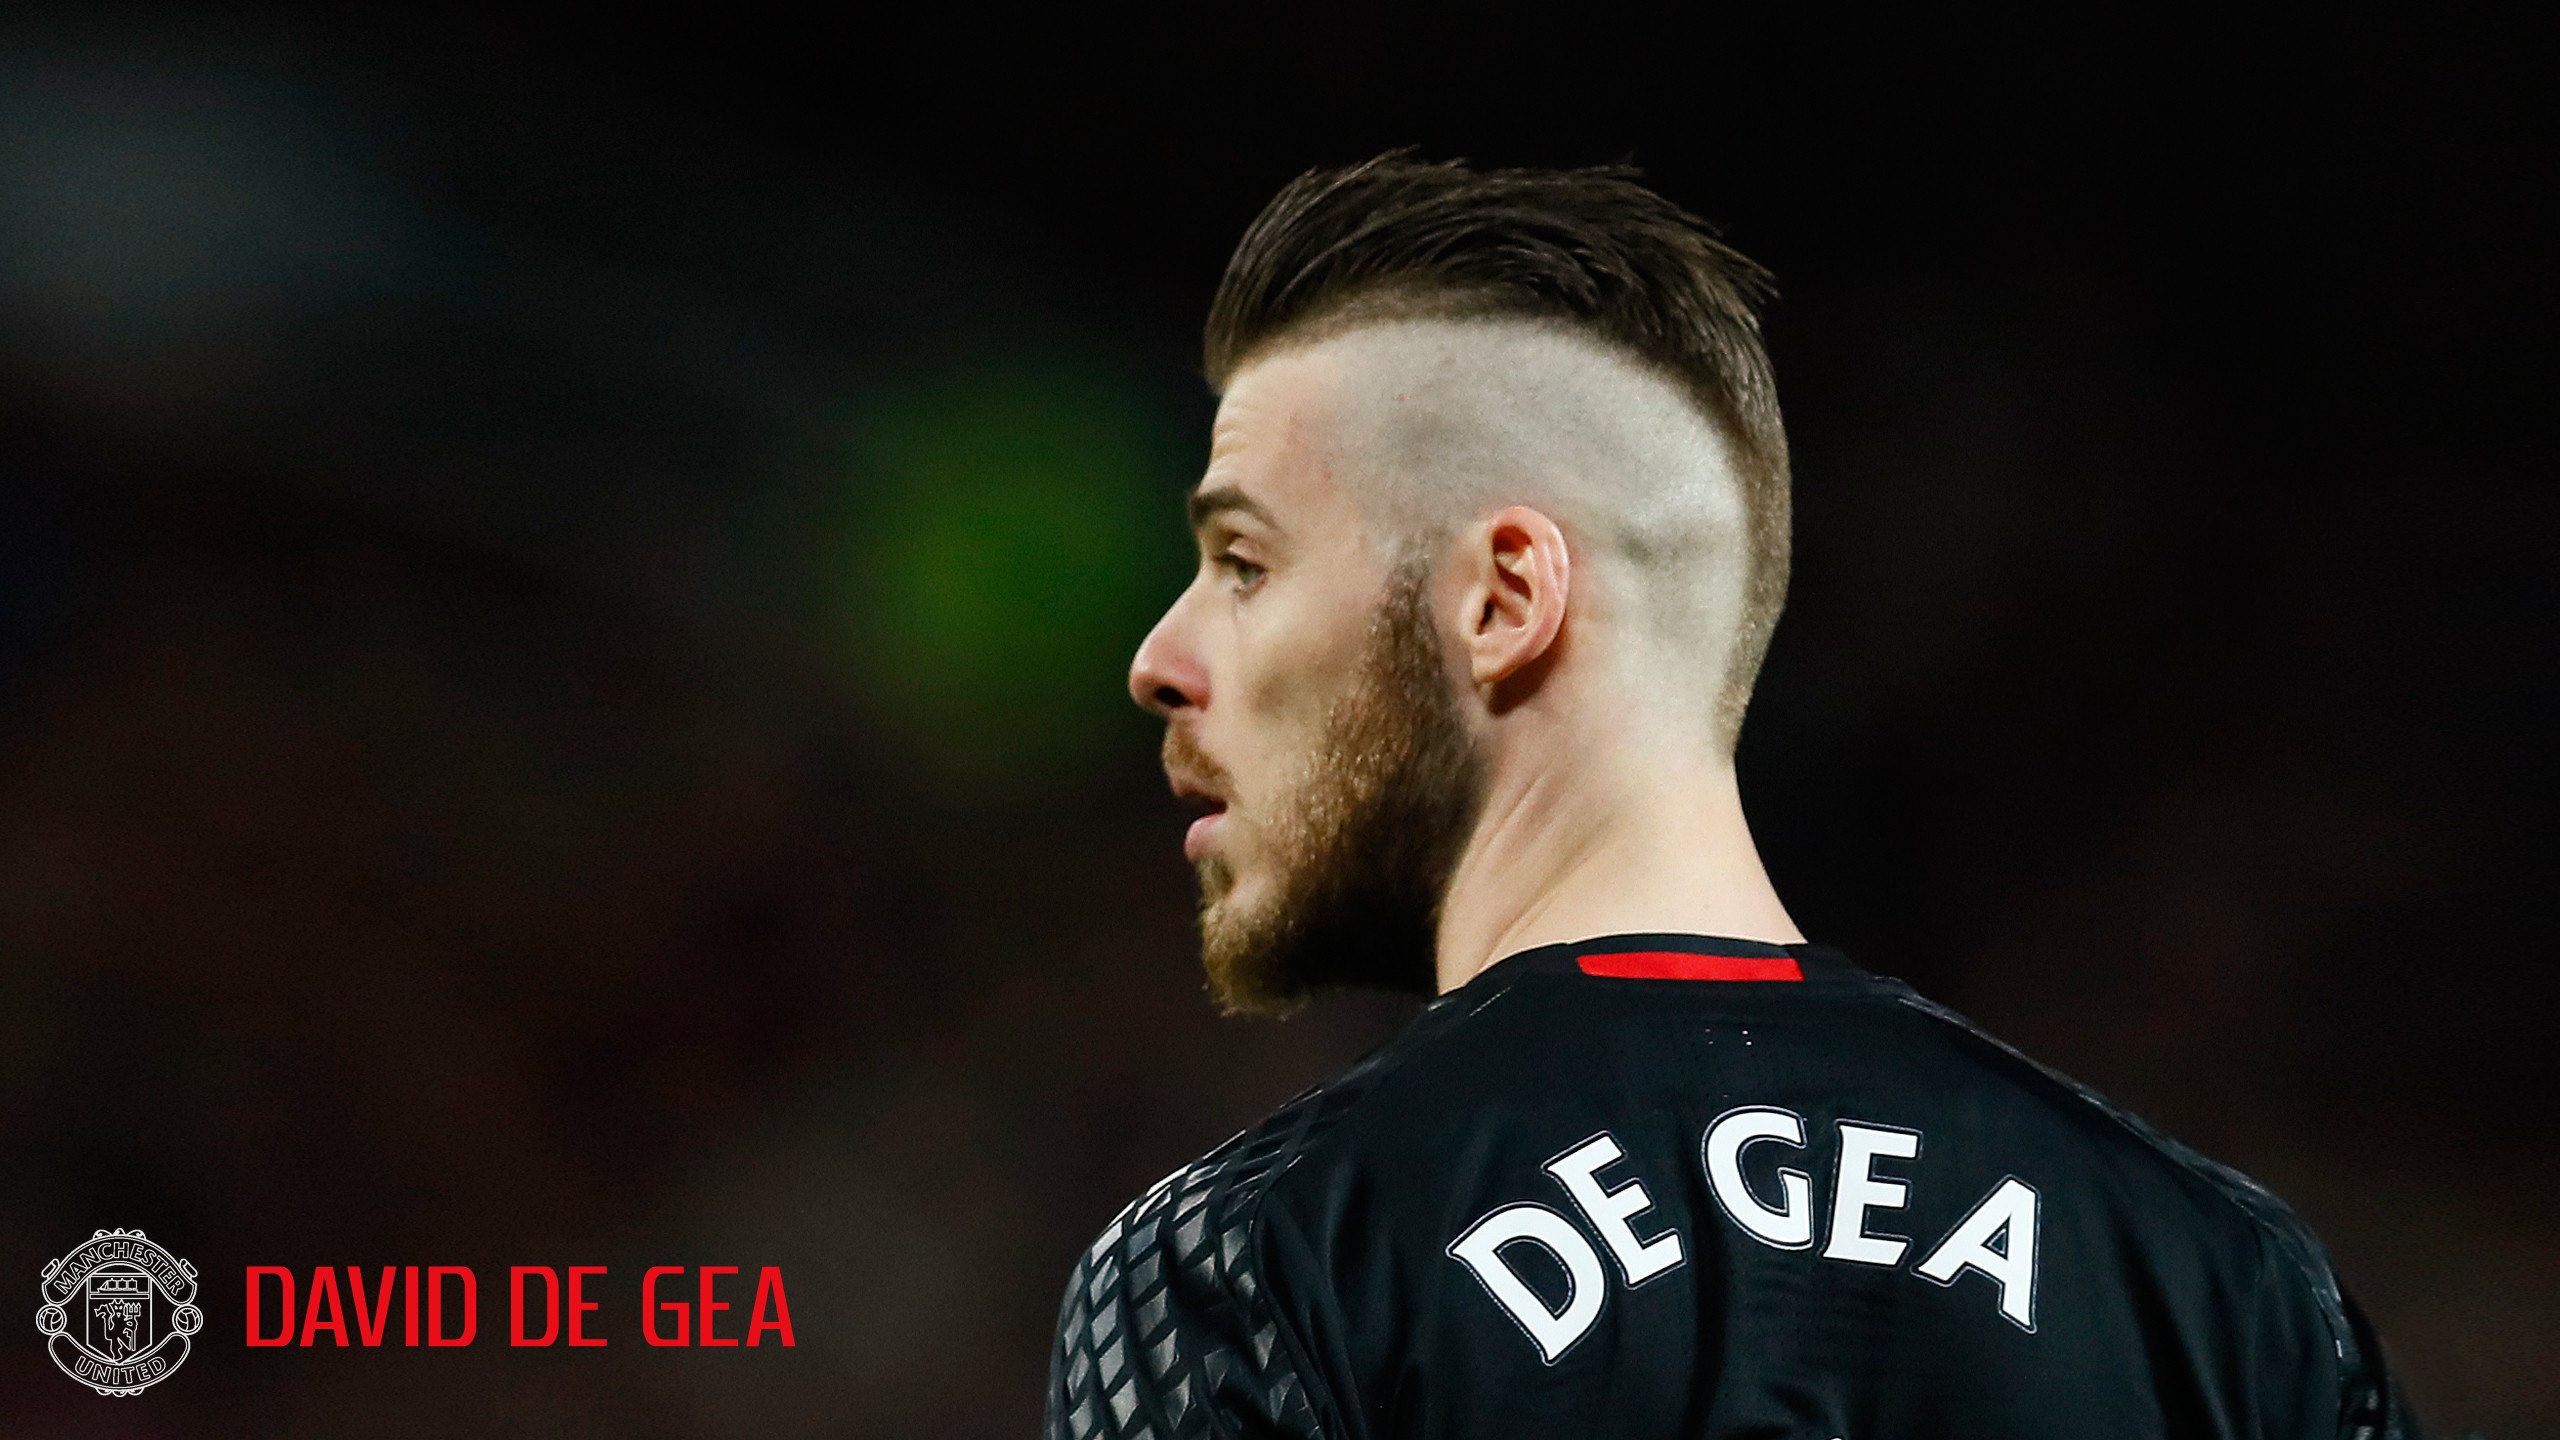 2560x1440 I love to share this picture of David de Gea Manchester United close up  photo. Manchester United has been magnificent this season since they won  several ...